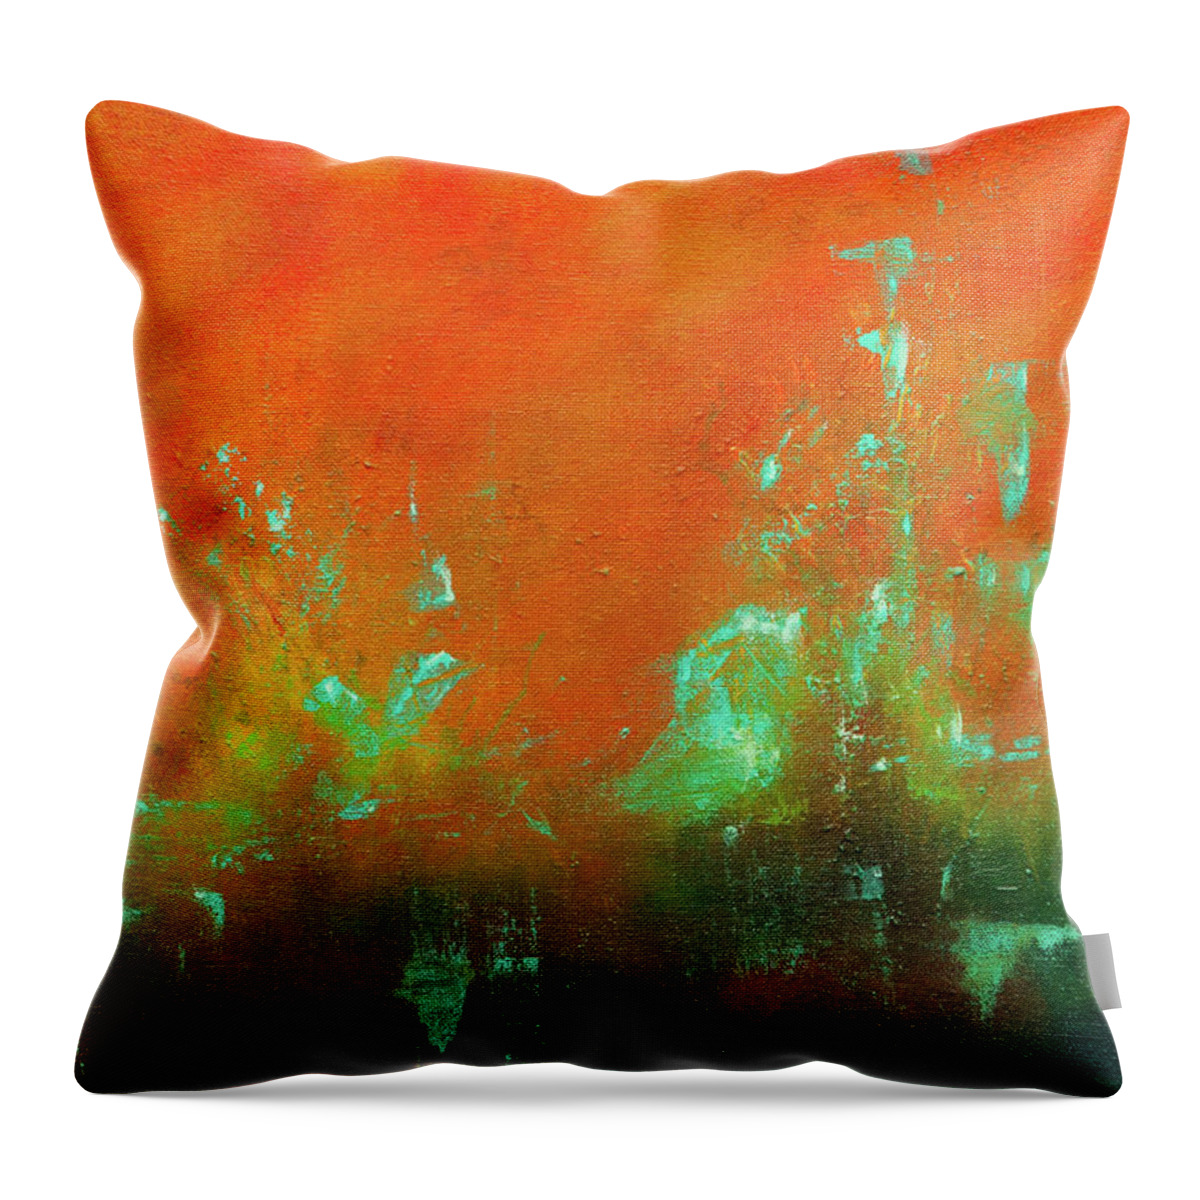 Abstract Throw Pillow featuring the painting Safe Harbor by Lee Beuther